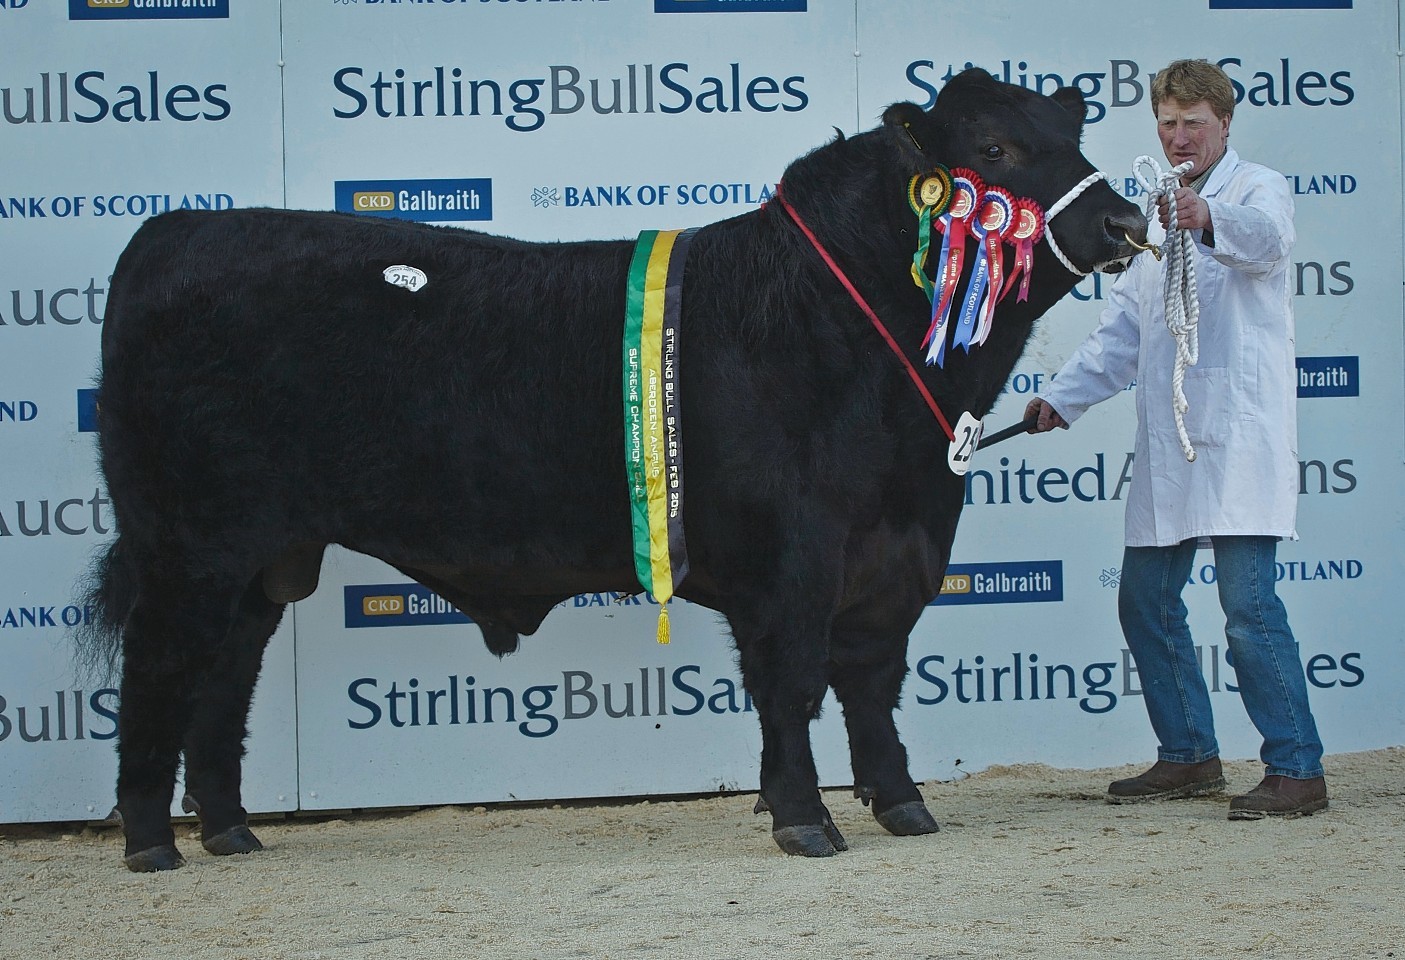 Day two at the Stirling Bull Sales